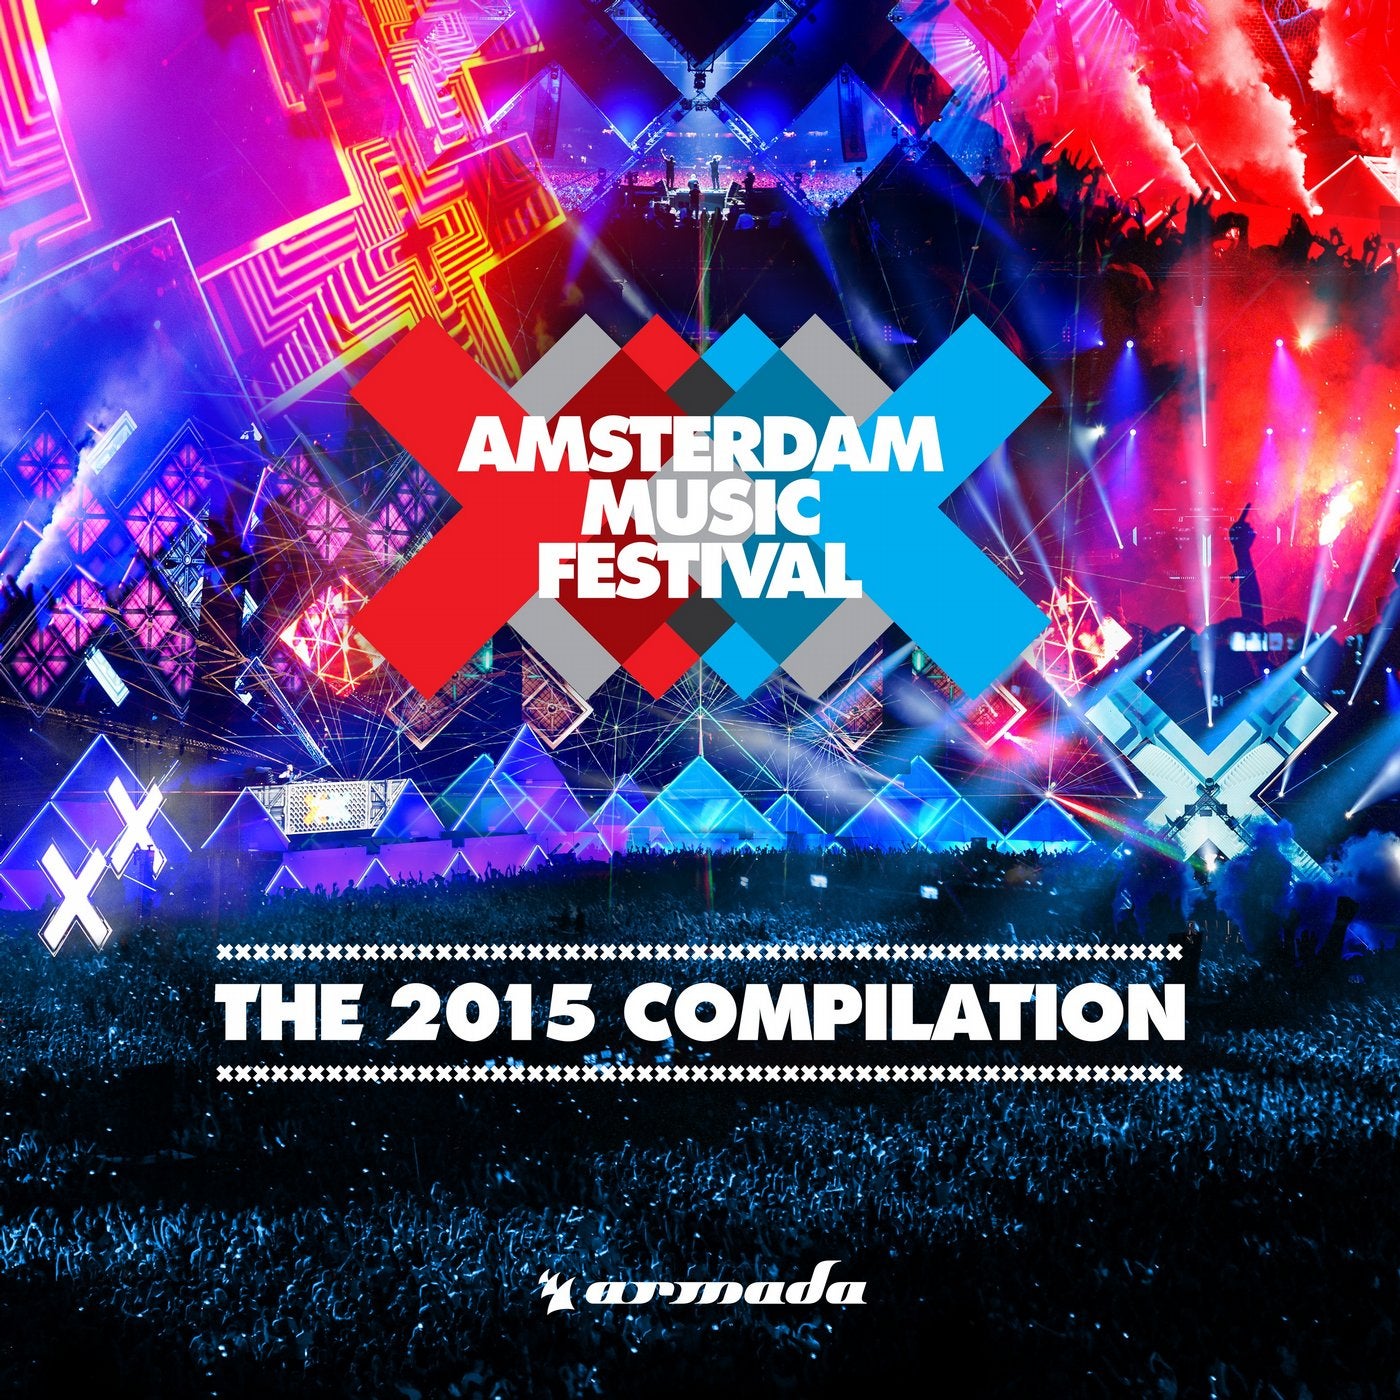 Amsterdam Music Festival - The 2015 Compilation